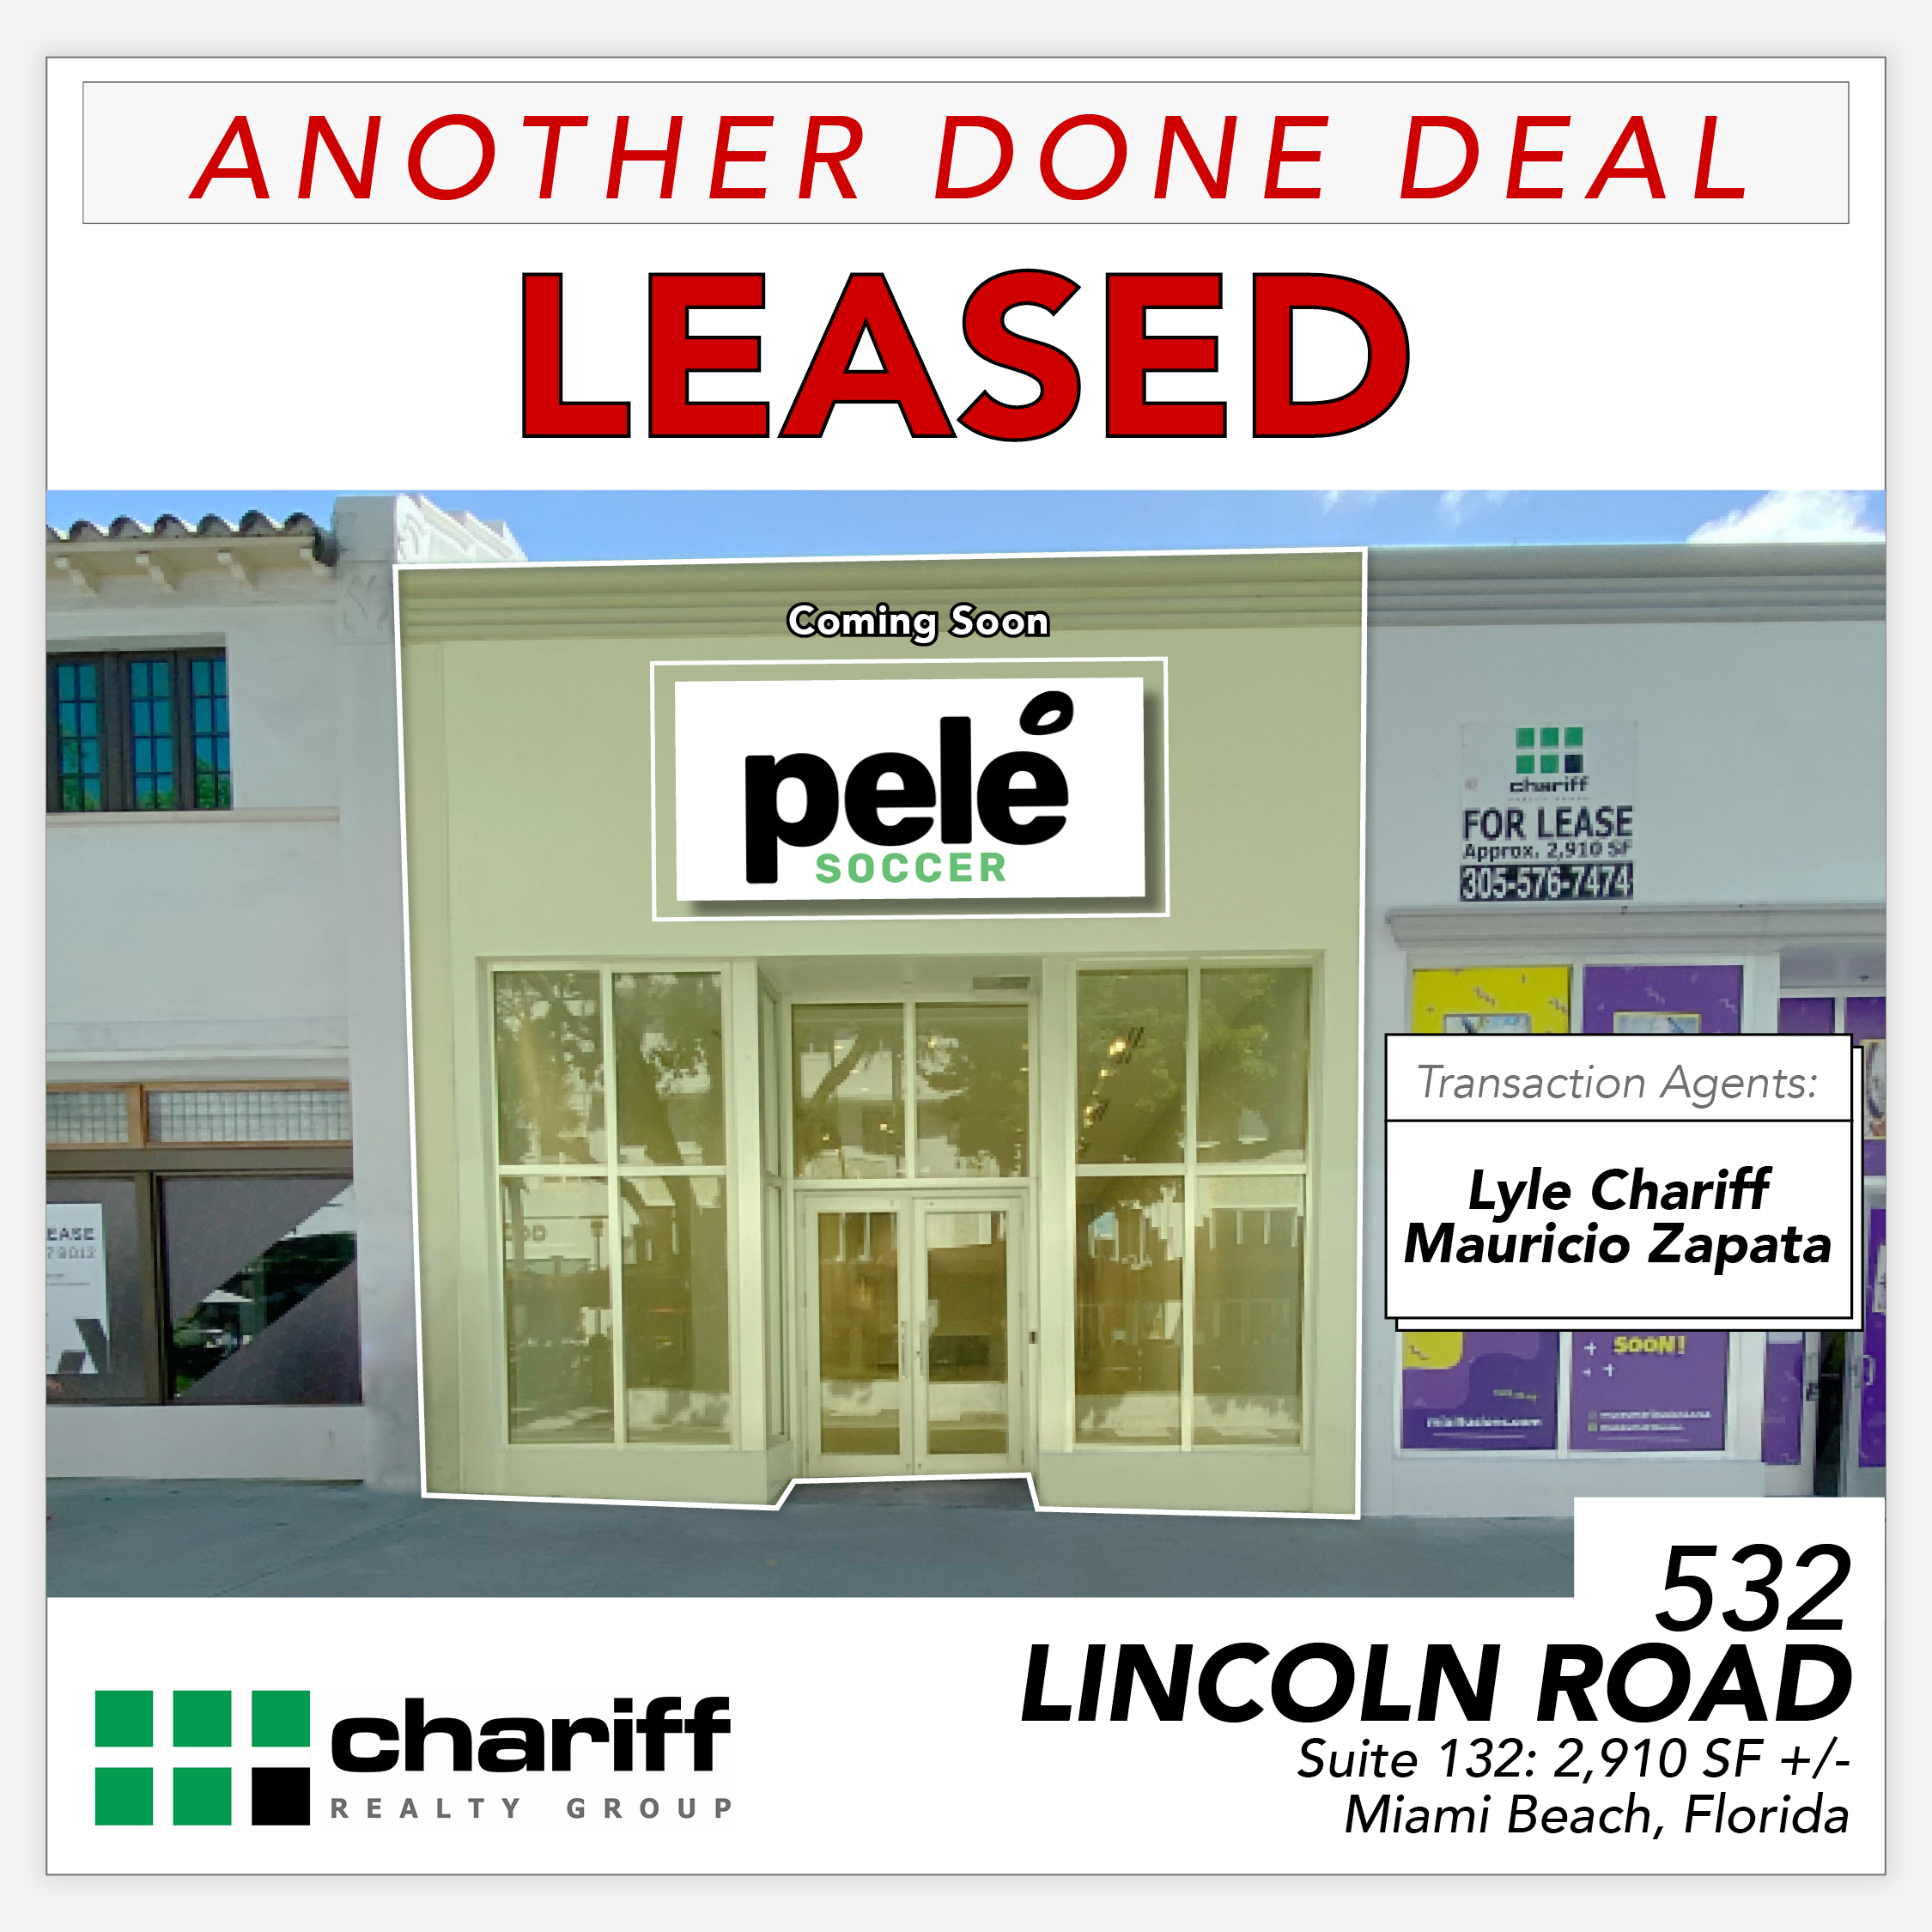 532 Lincoln Road - Another Done Deal-Sold- Lincoln Road Mall -Miami Beach -Florida-33139-Chariff Realty Group